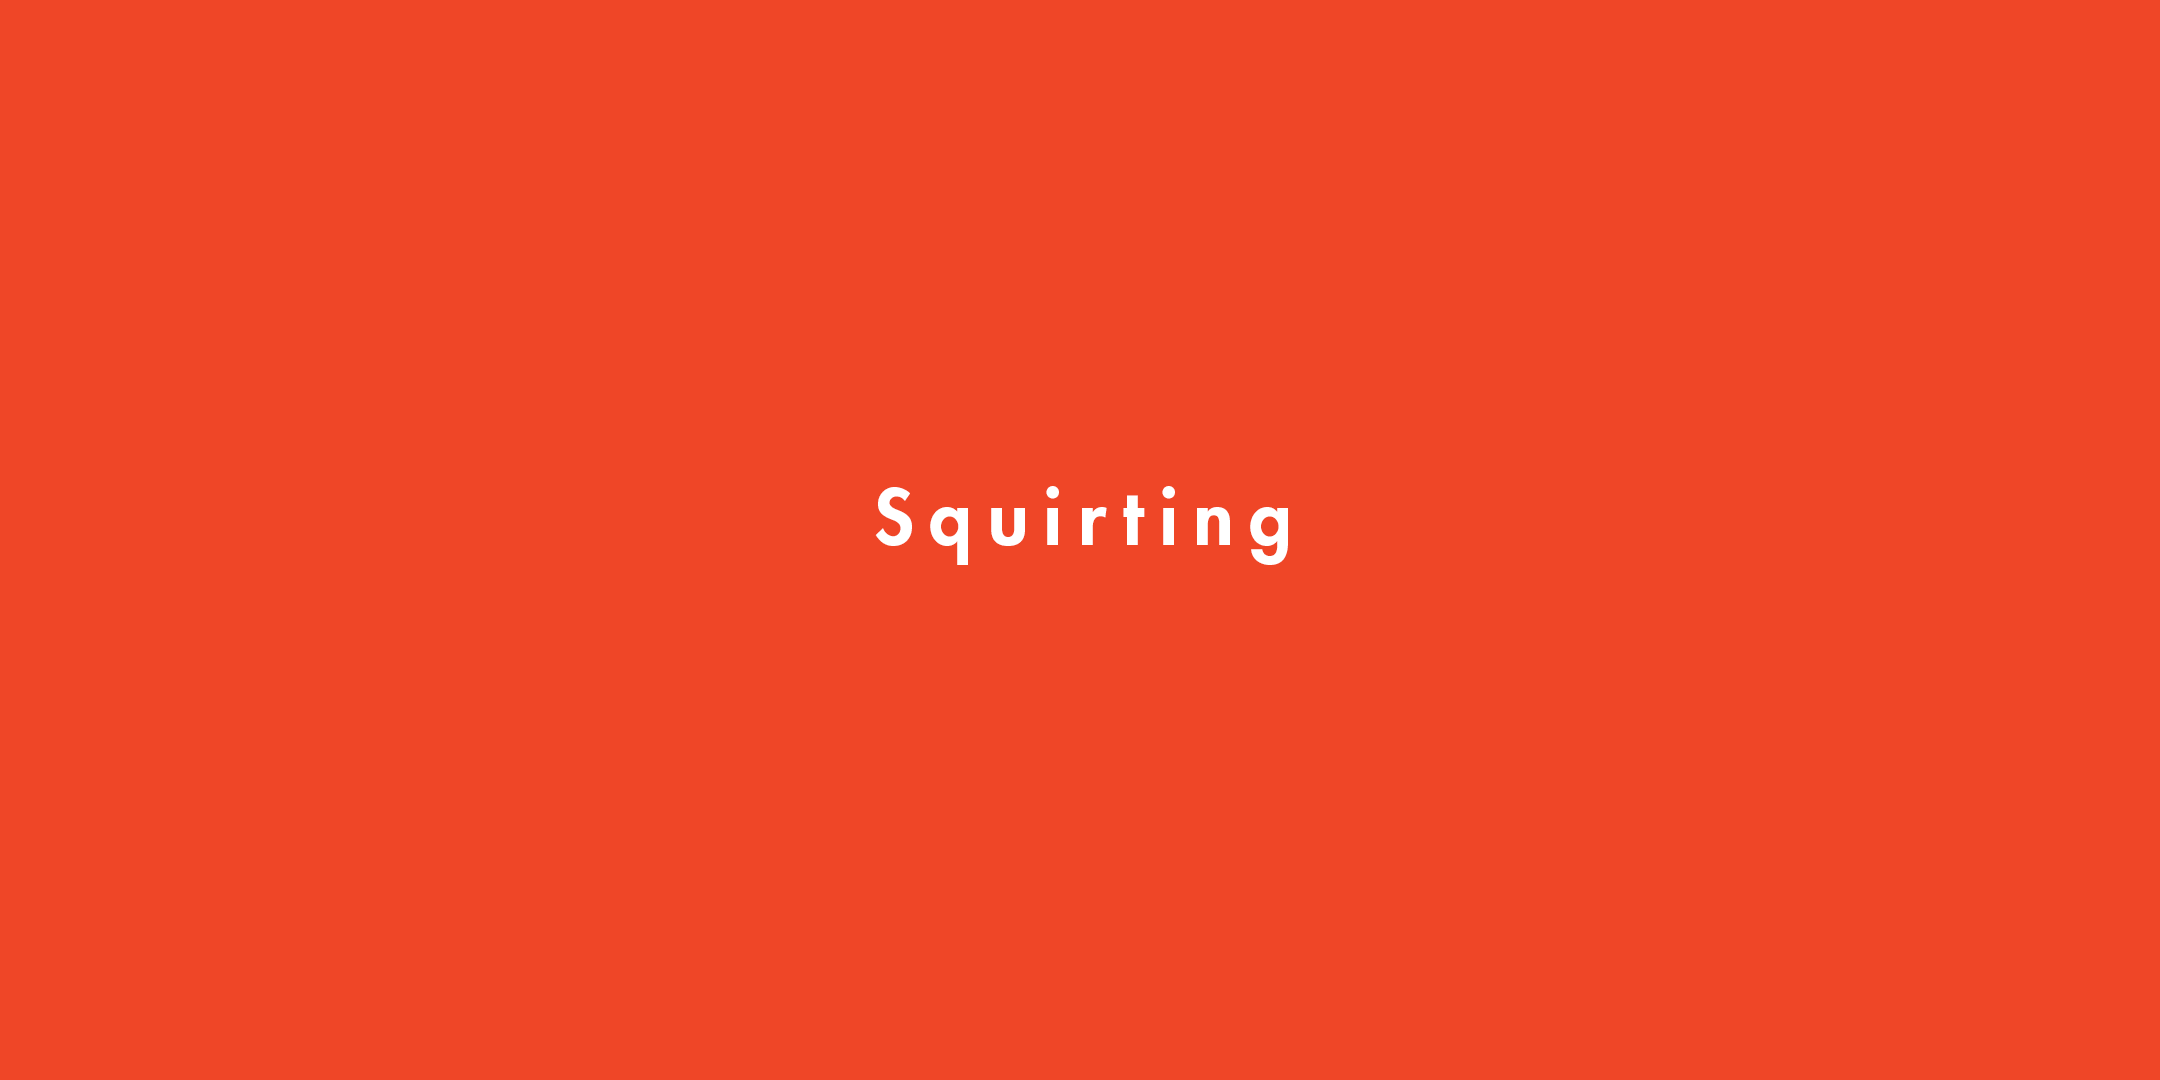 Squirting Forced - Squirting Definition - What to Know About Female Ejaculation